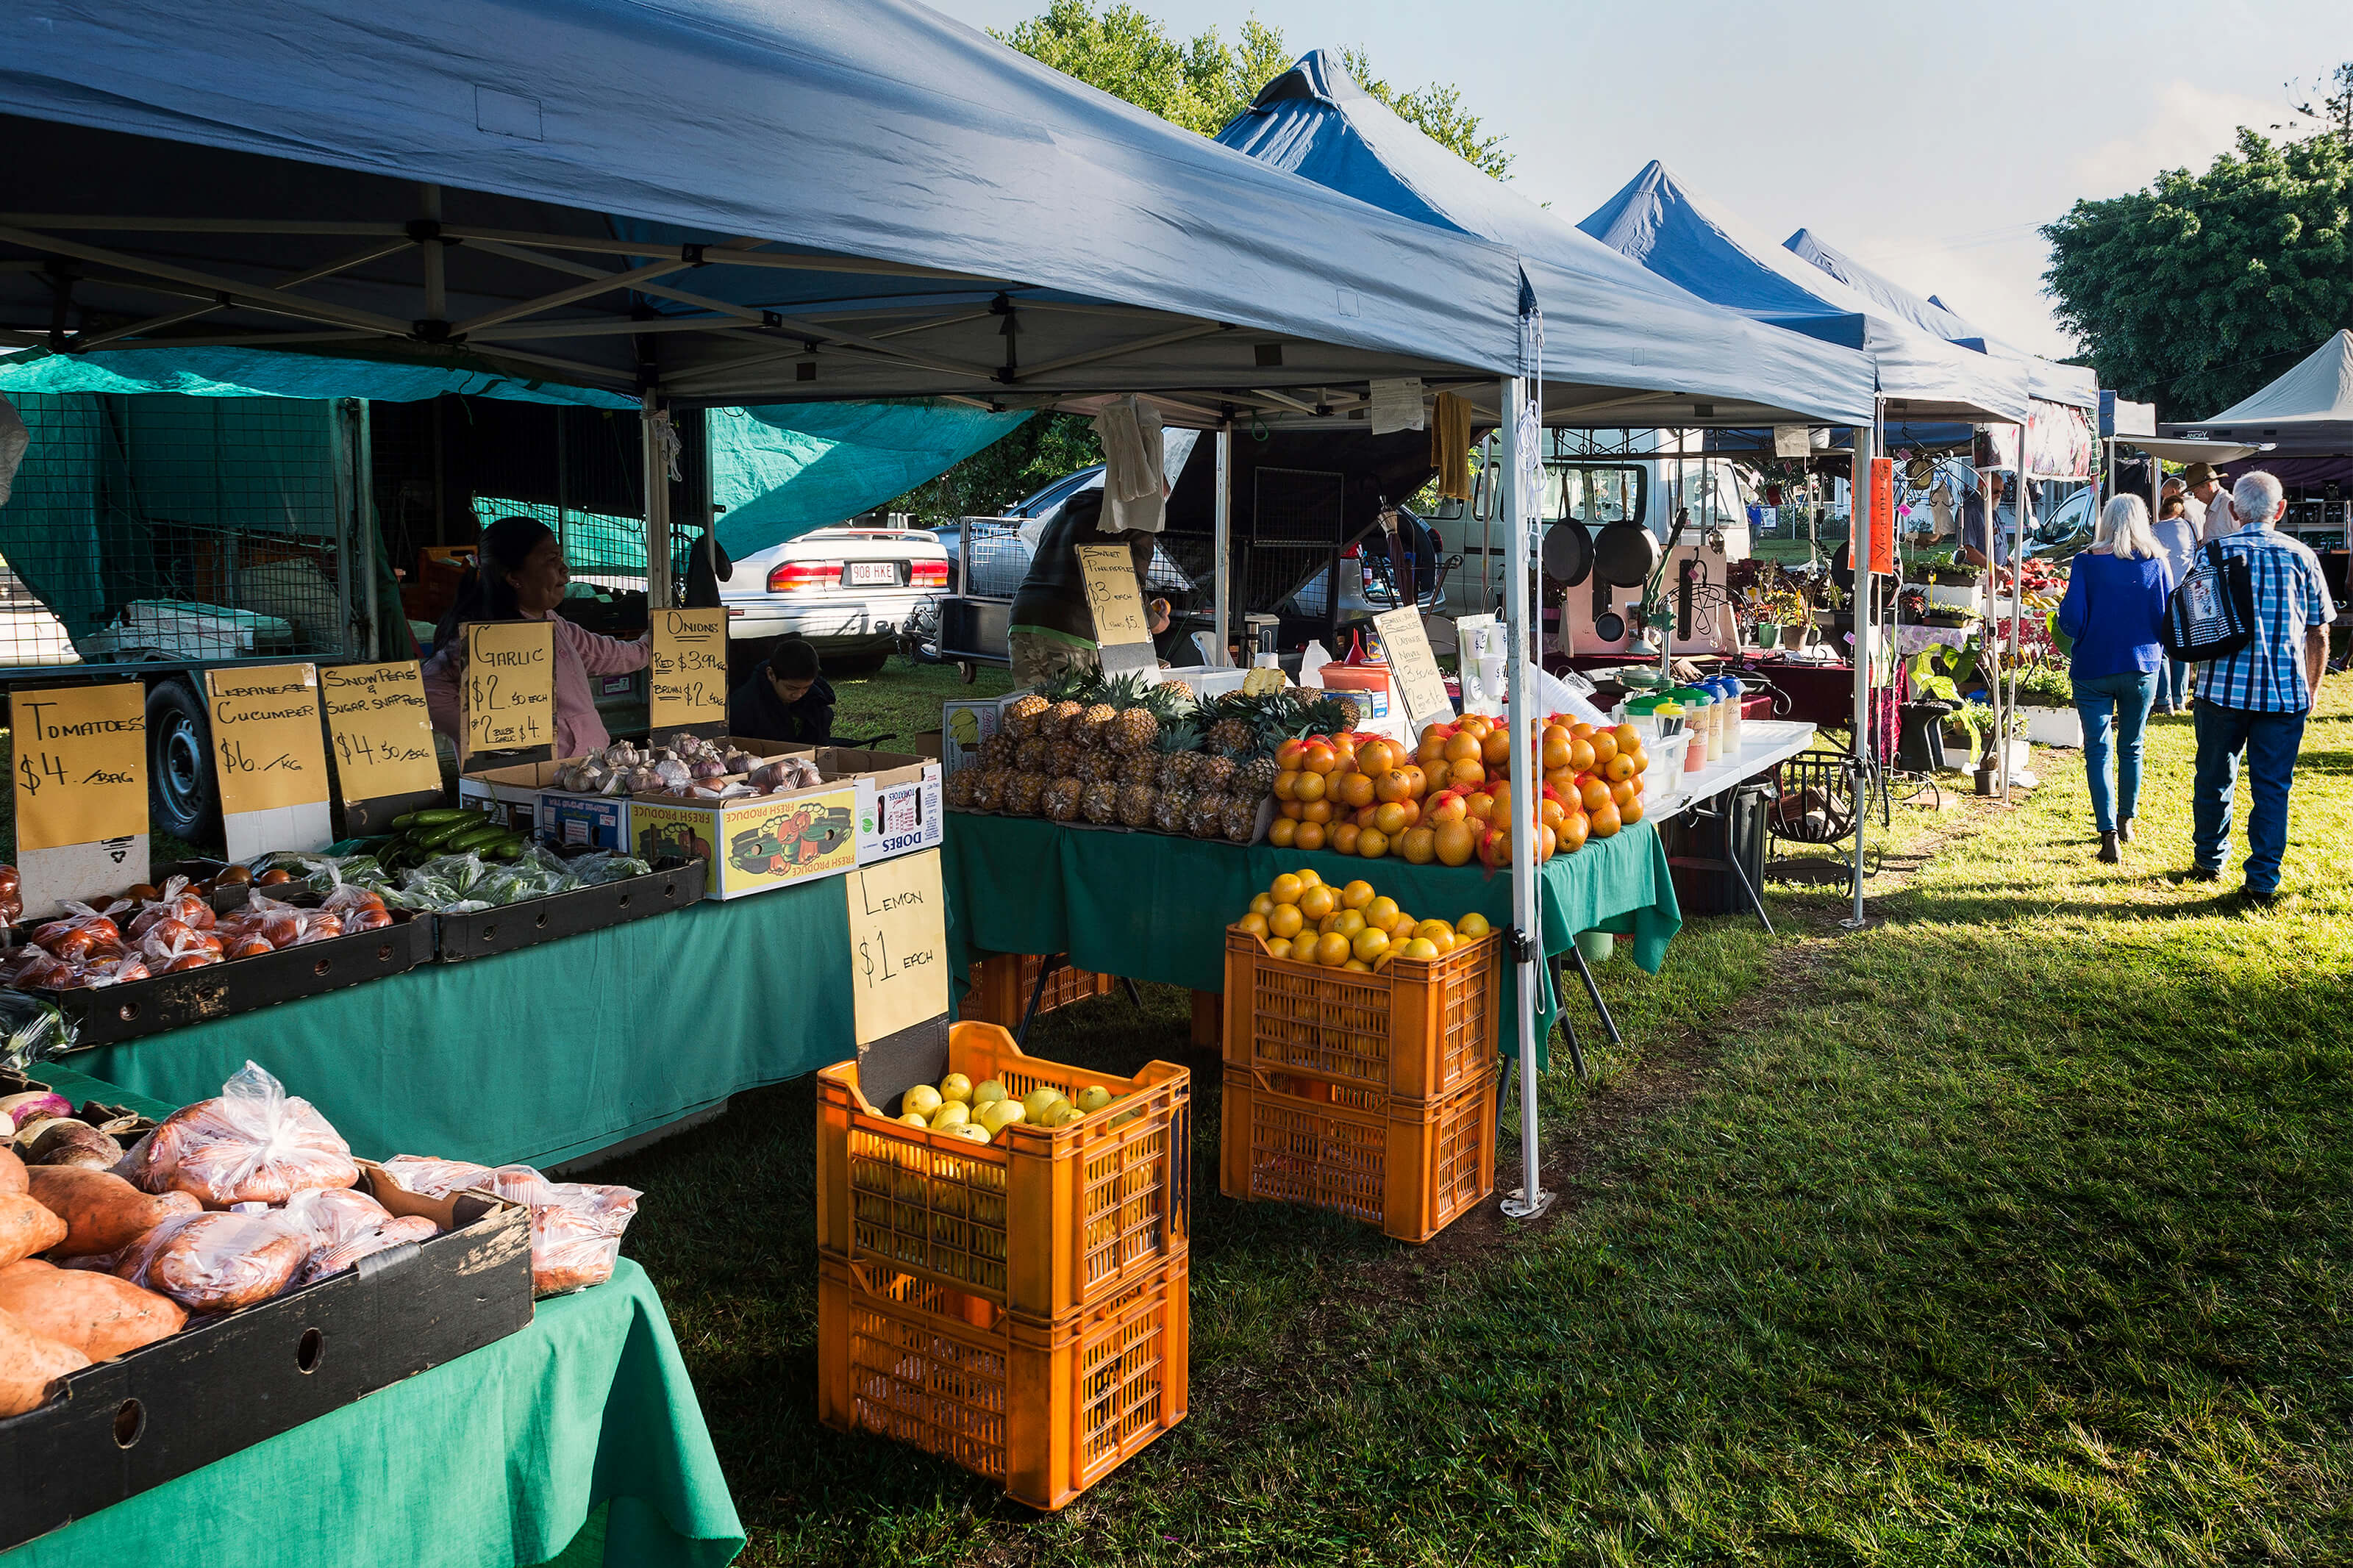 The Yungaburra Markets are the biggest on the Atherton Tablelands